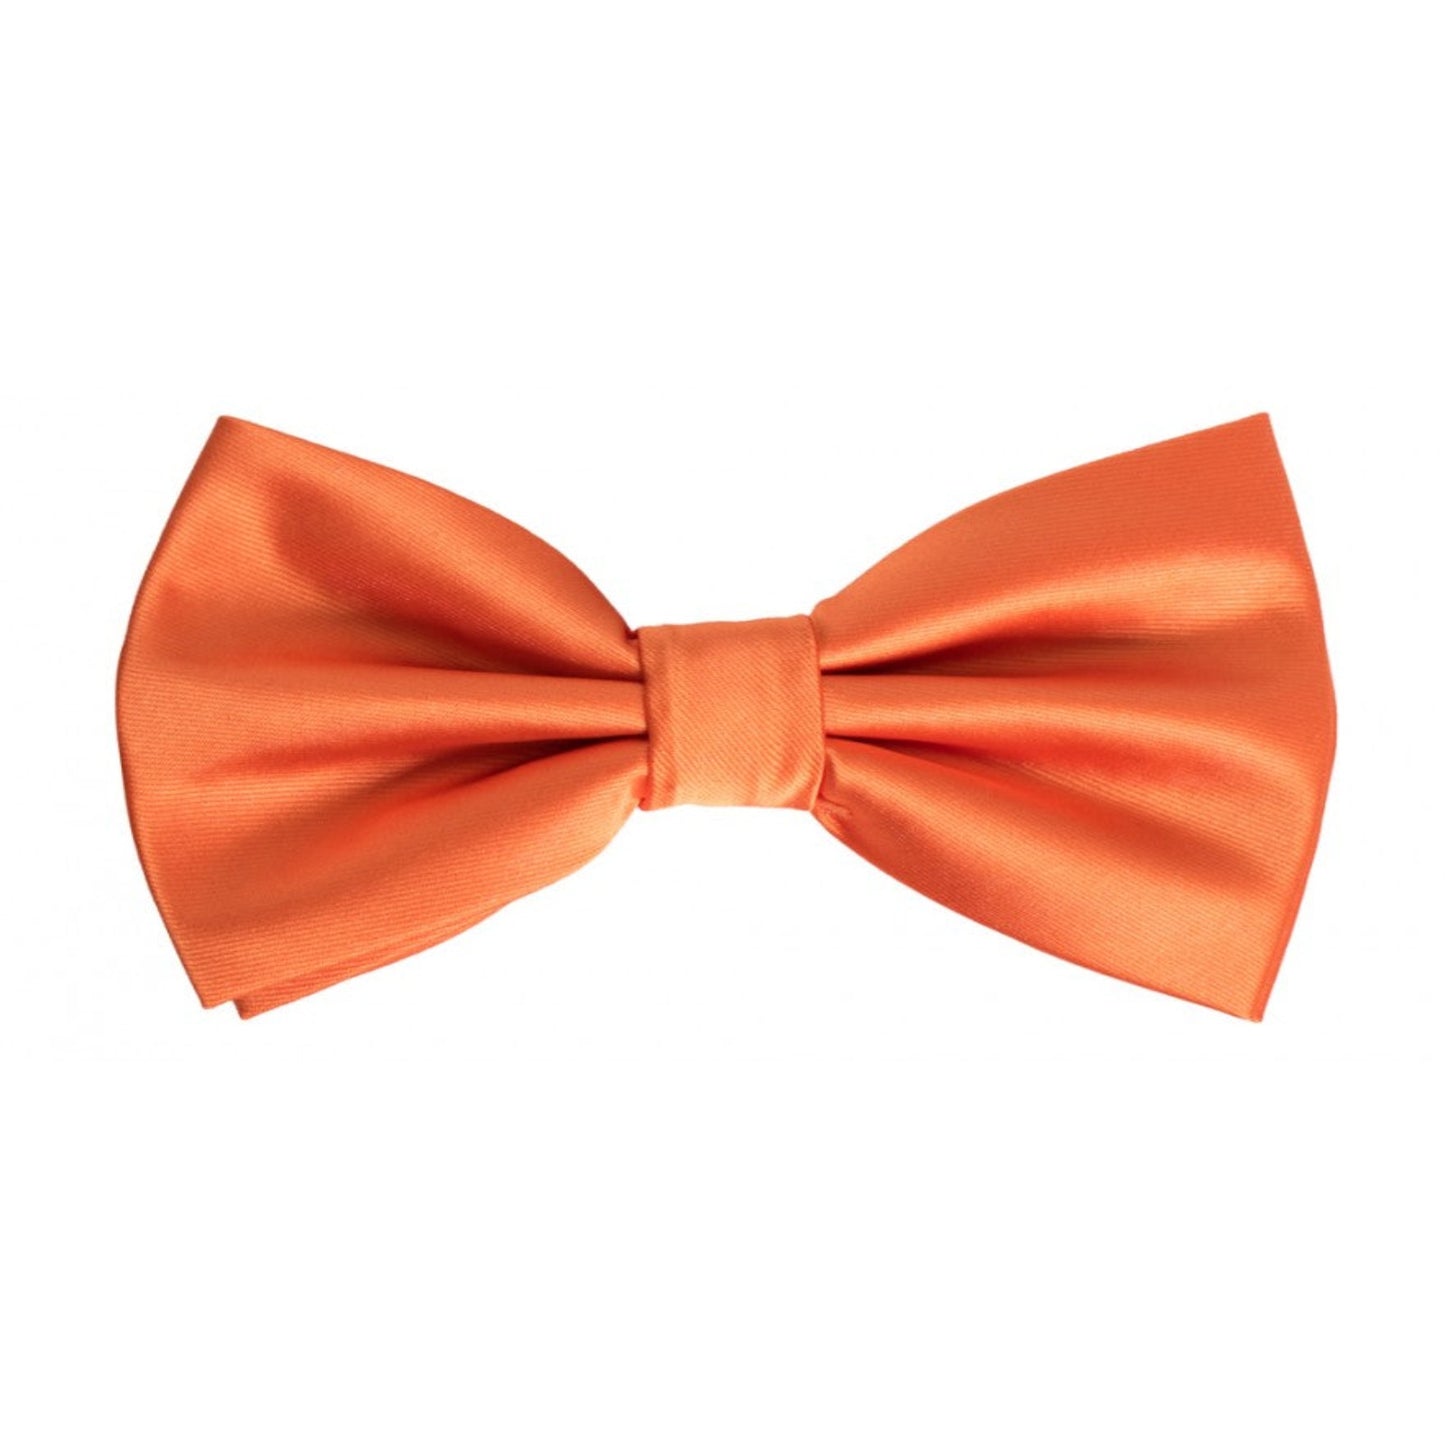 Classic Orange Bowtie With Matching Pocket Square | KCT Menswear 